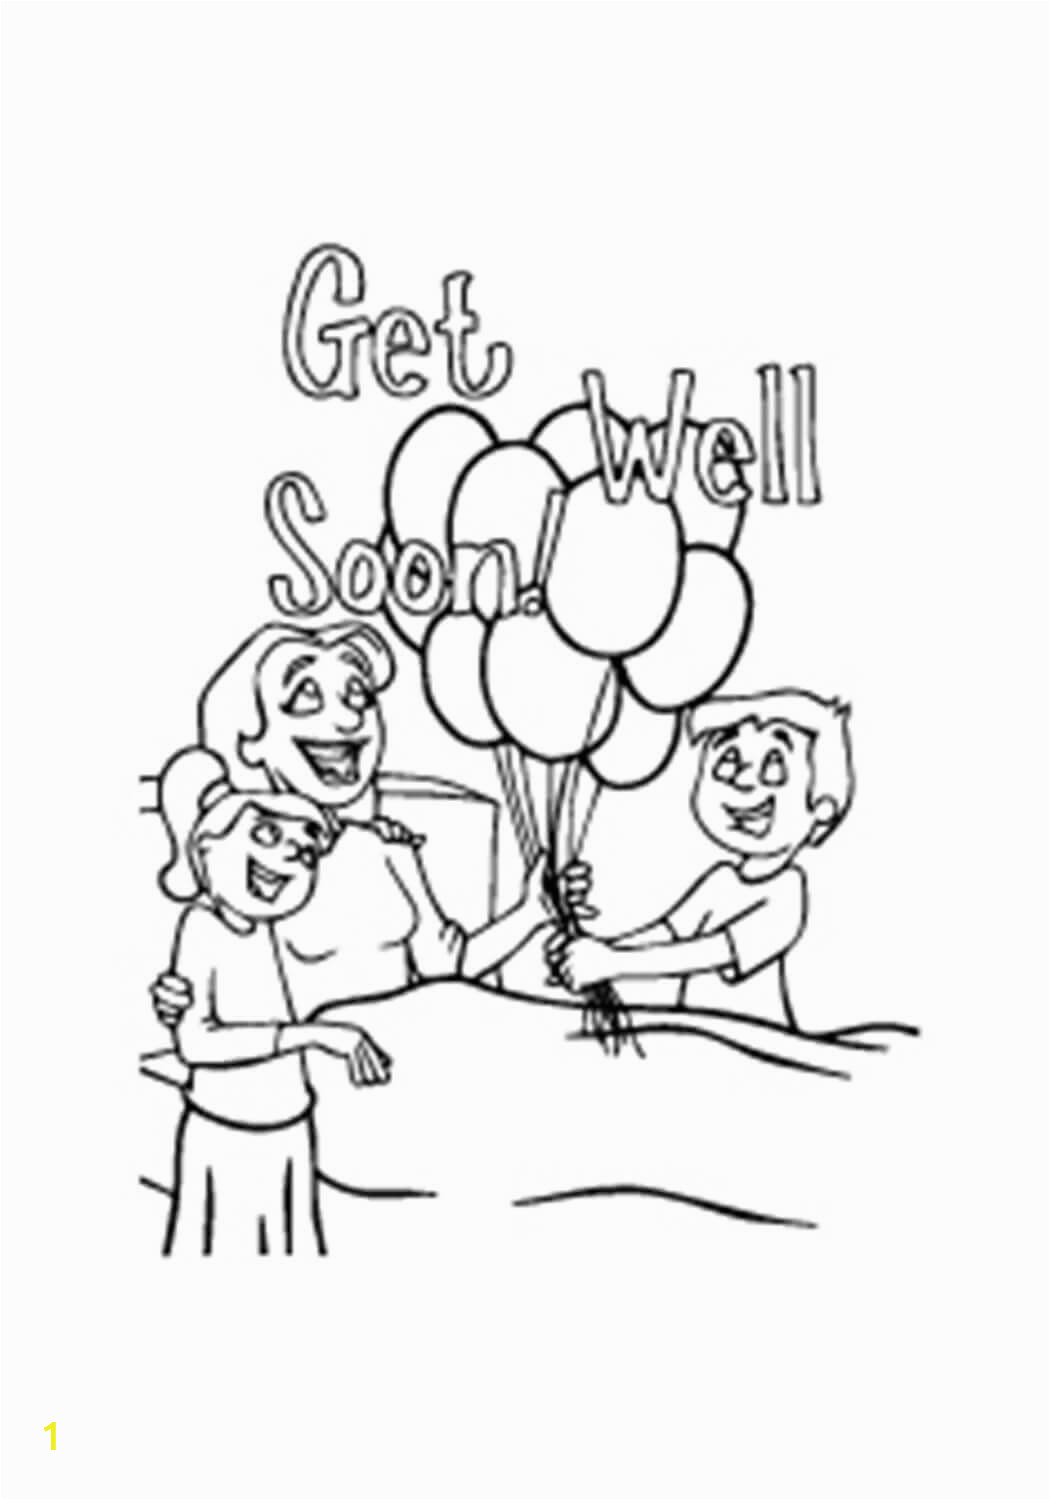 well soon coloring pages